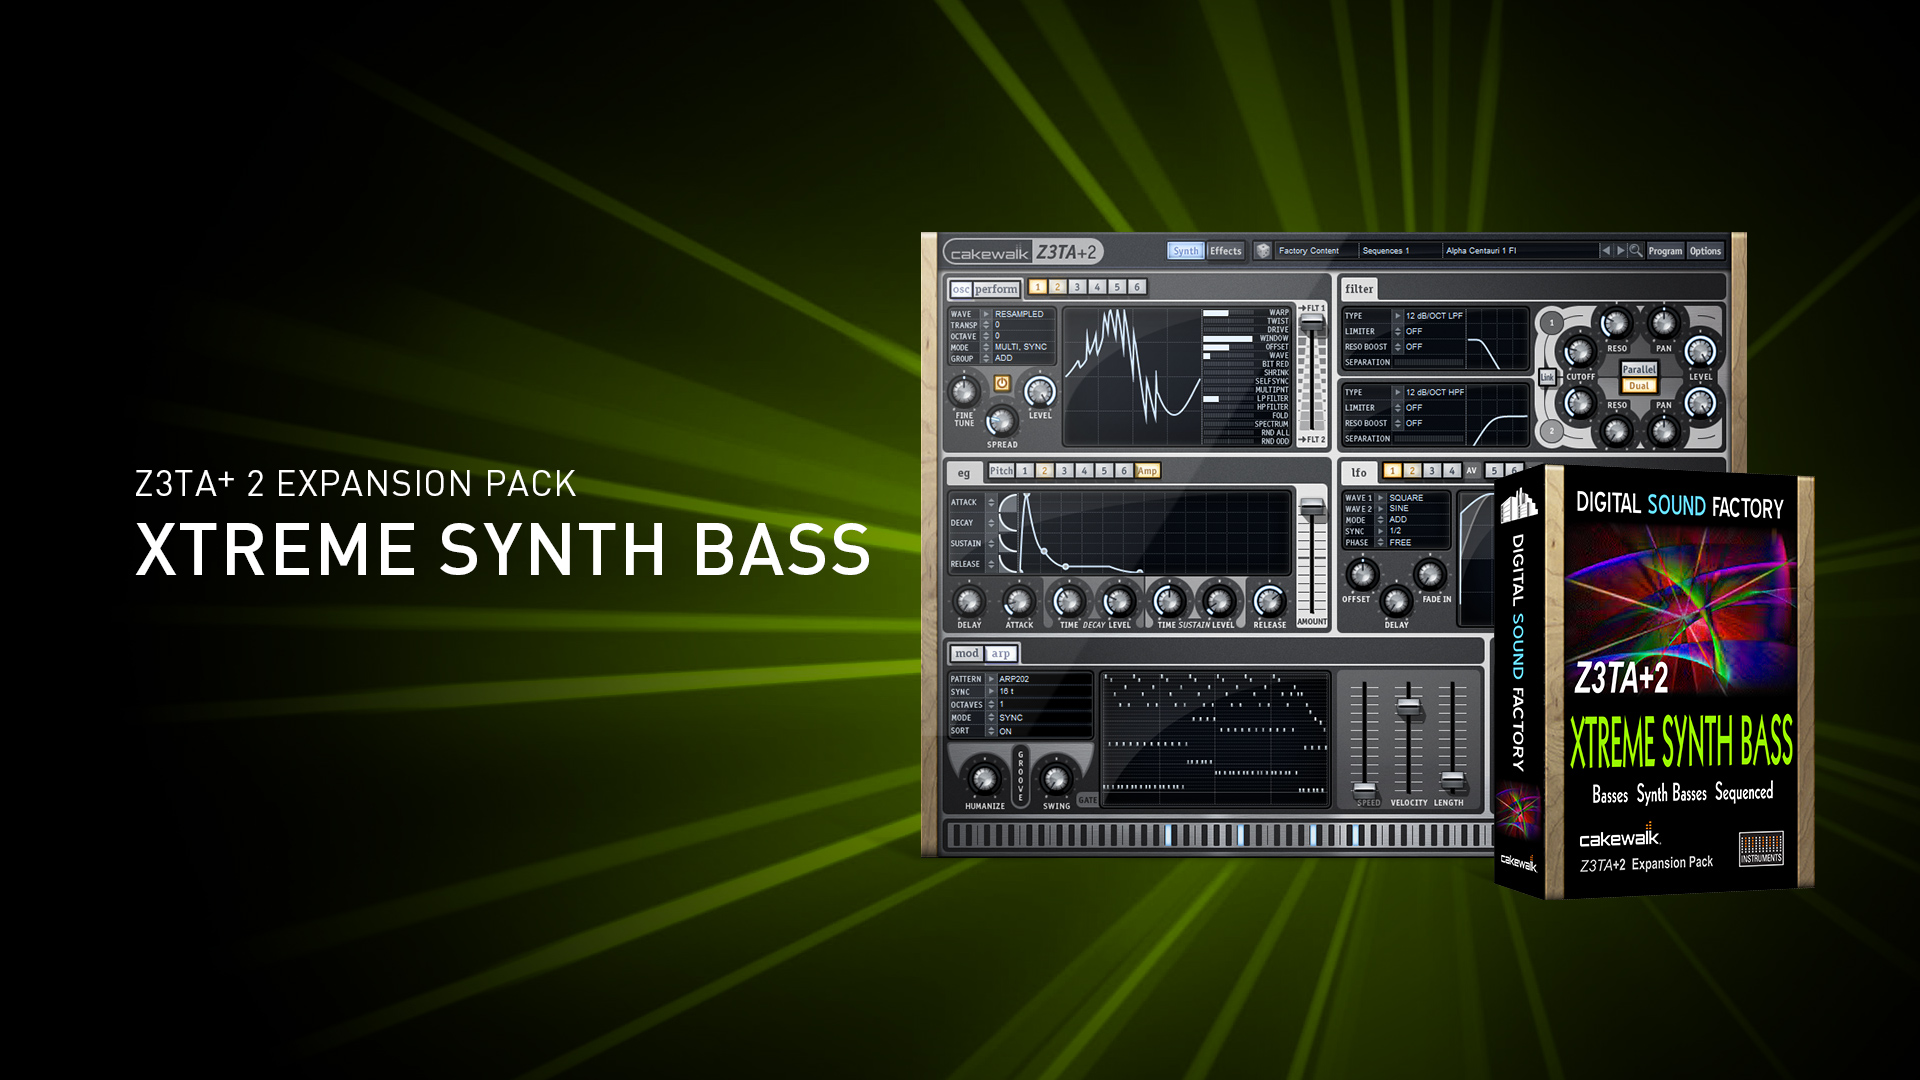 Z3TA+ 2 - DSF Xtreme Synth Bass Expansion Pack screenshot